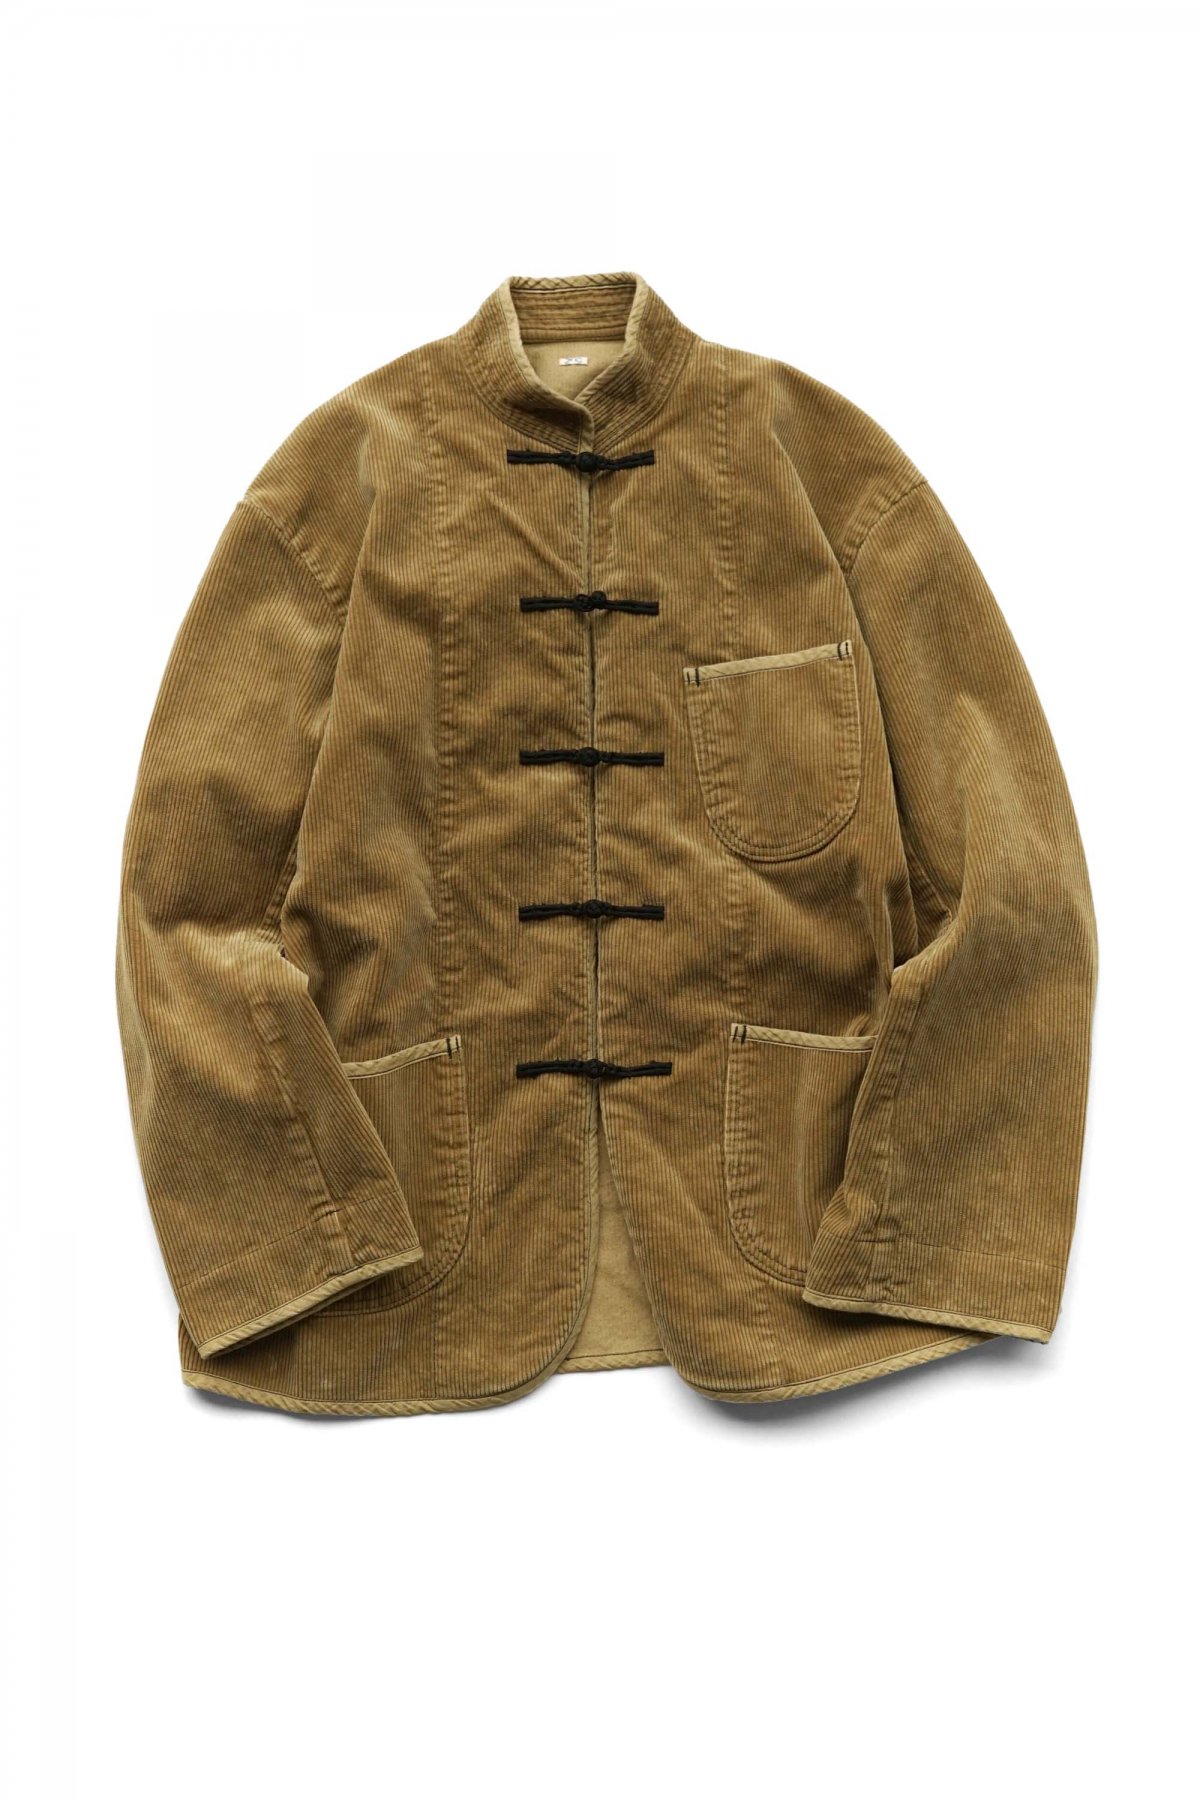 Porter Classic - CORDUROY CHINESE JACKET - WATCH CHAIN ITEM